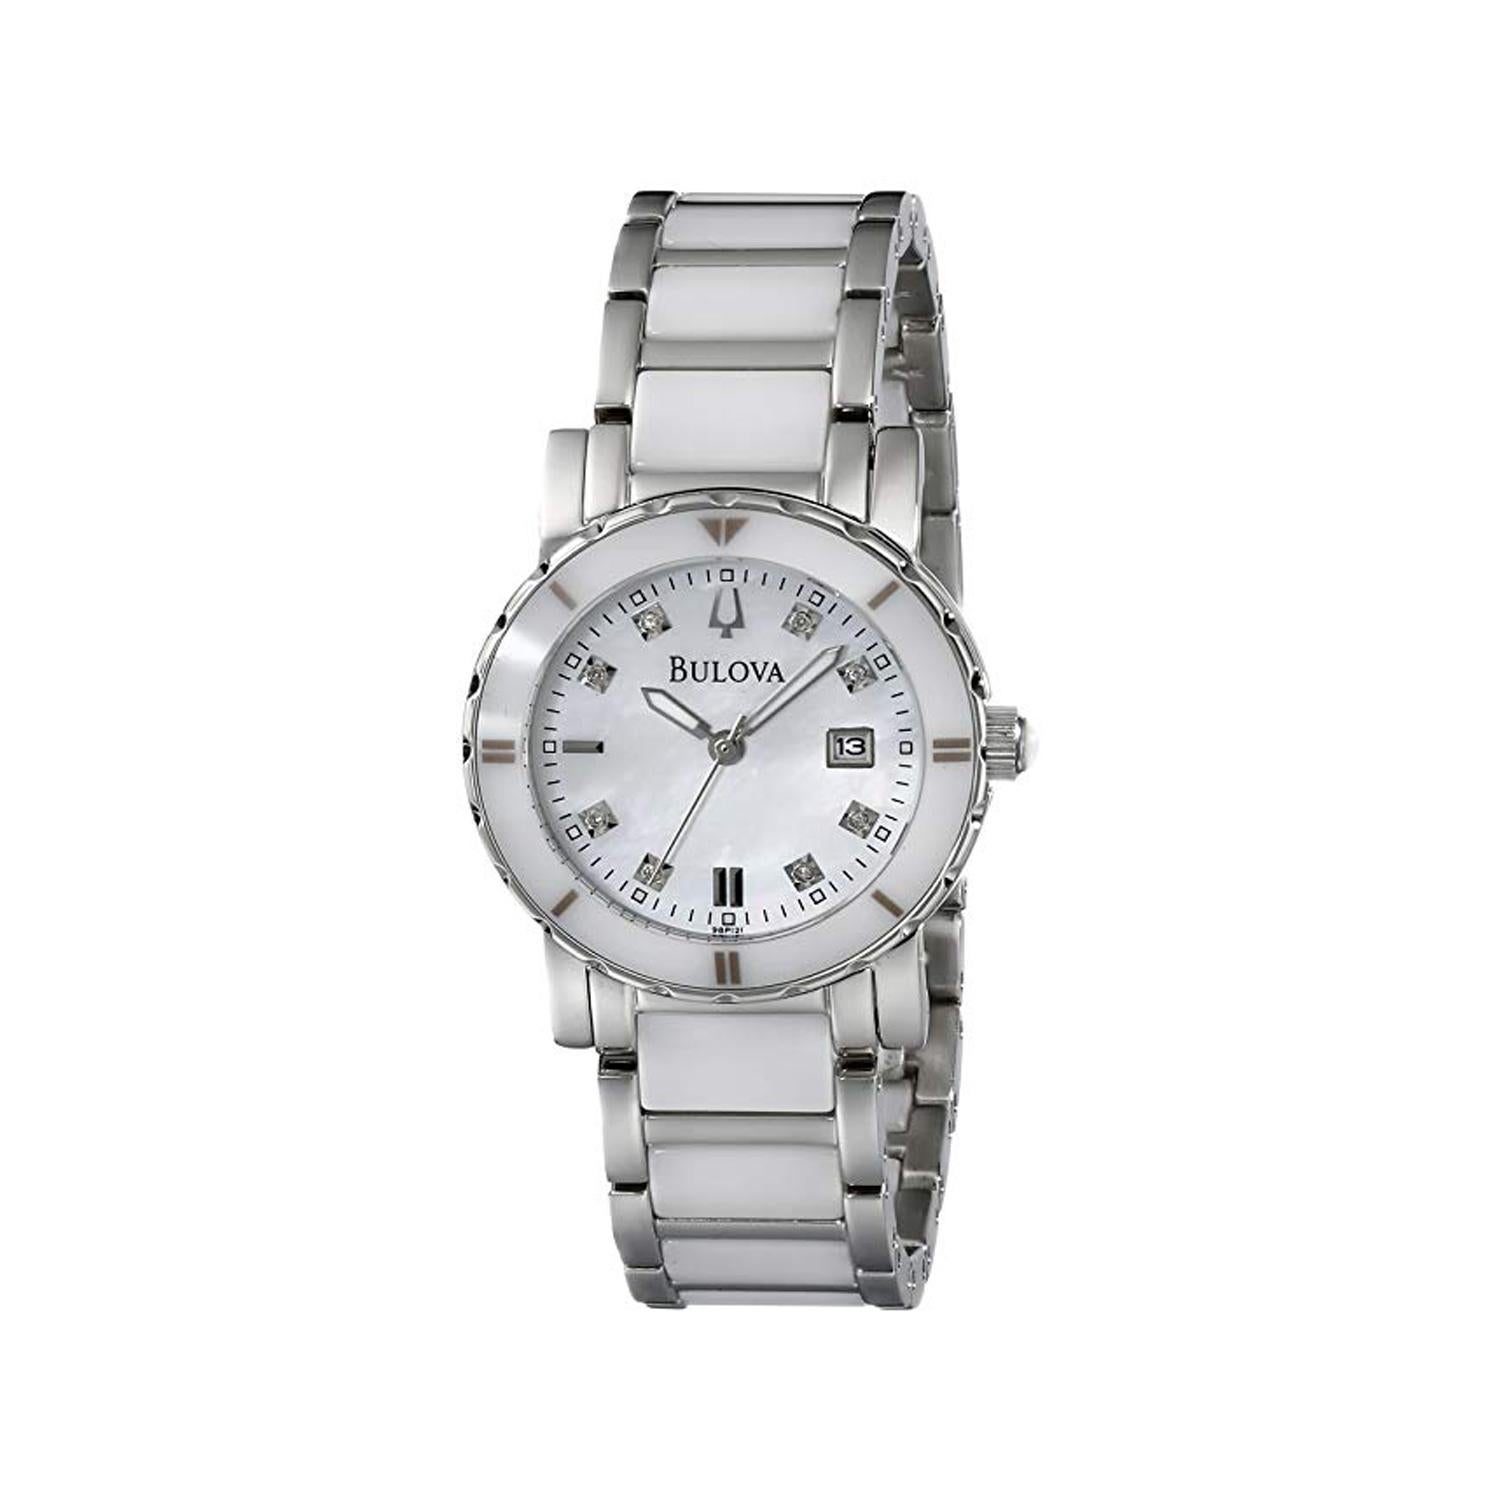 This New Without Tags Bulova   98P121 is a beautiful Ladies timepiece that is powered by a quartz movement which is cased in a stainless steel case. It has a round shape face, date dial and has hand diamonds style markers. The case size is 30mm. It